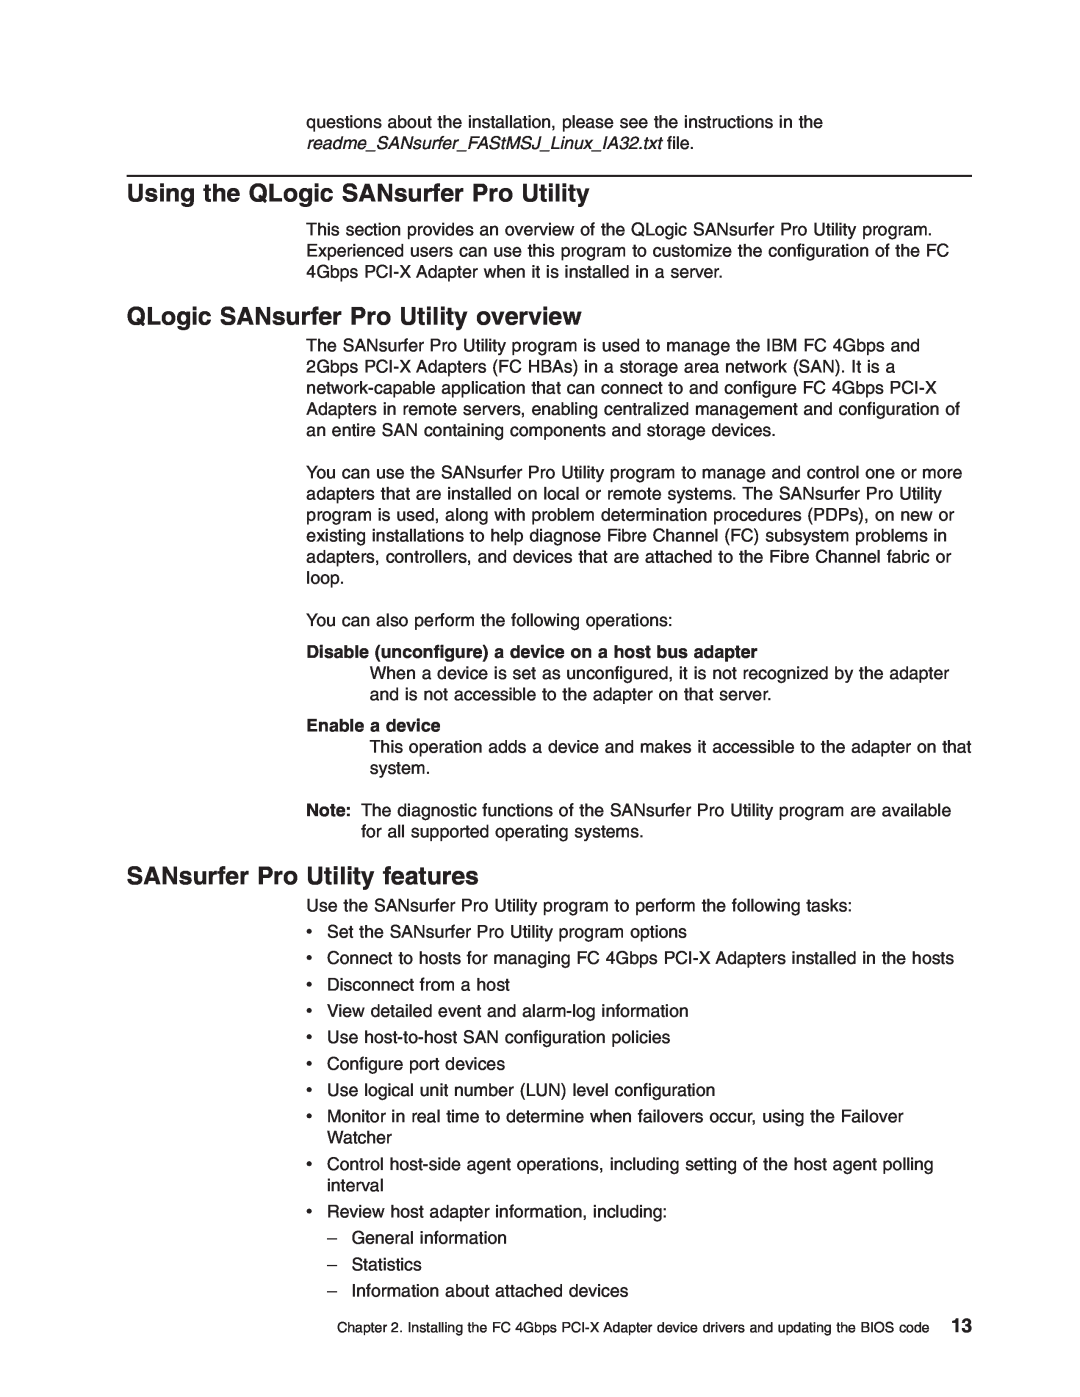 IBM DS4000 FC manual Using the QLogic SANsurfer Pro Utility, QLogic SANsurfer Pro Utility overview, Enable a device 